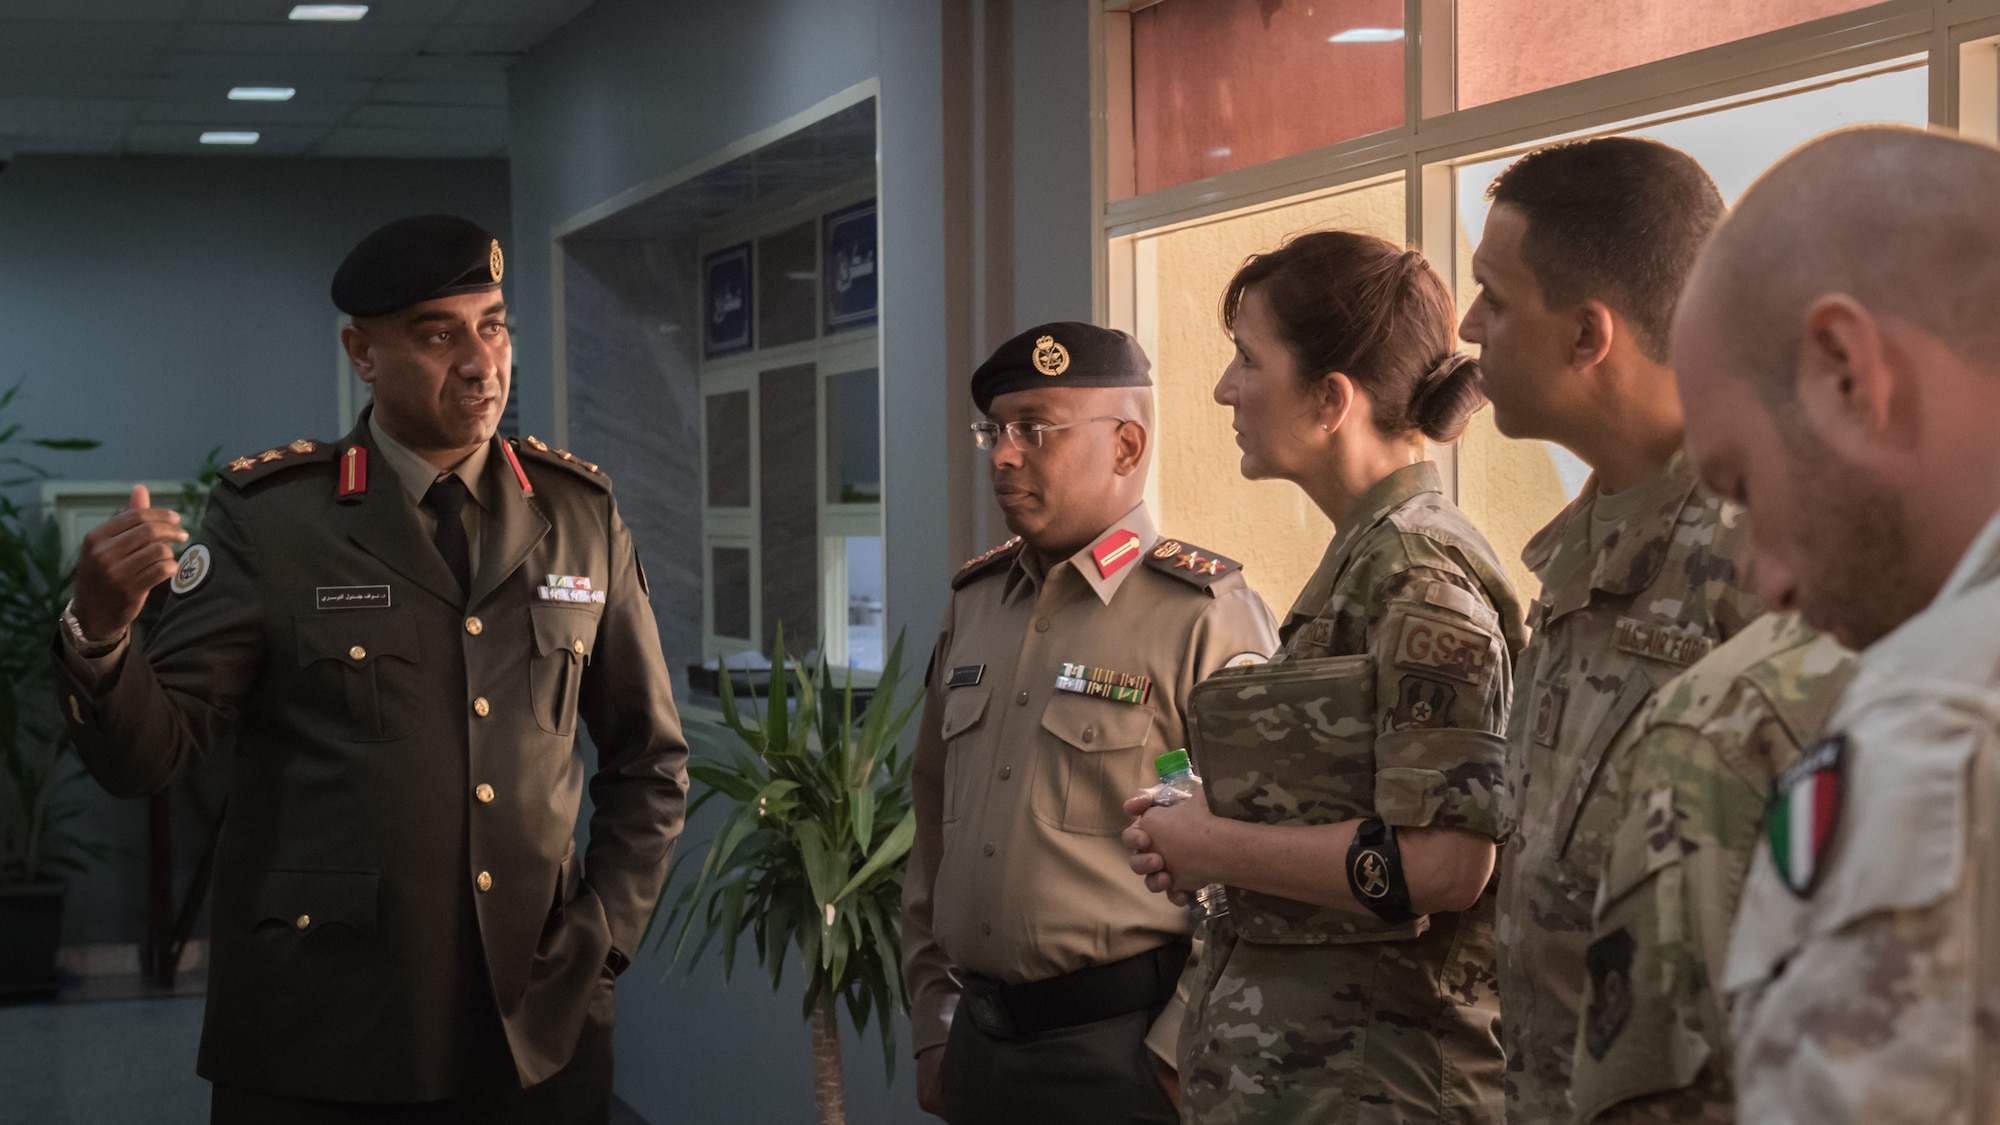 Leadership and staff members from the 386th Expeditionary Medical Group receive a tour of the Kuwaiti army's North Military Medical Complex in Al Jahra, Kuwait, Nov. 7, 2019.  Left to right: Kuwait army Col. Nawaf Jandoul Al-Dousari, North Military Medical Complex director; Kuwaiti army Col. Homoud Alenezi, North Military Medical Complex assistant director; U.S. Air Force Col. Courtney Finkbeiner, 386th EMDG commander; U.S. Air Force Chief Master Sgt. Alan Weary, 386th EMDG superintendent; Italian air force Lt. Salvatore Napolitano,Task Force Air-Kuwait flight surgeon. (U.S. Air Force photo by Tech. Sgt. Daniel Martinez)